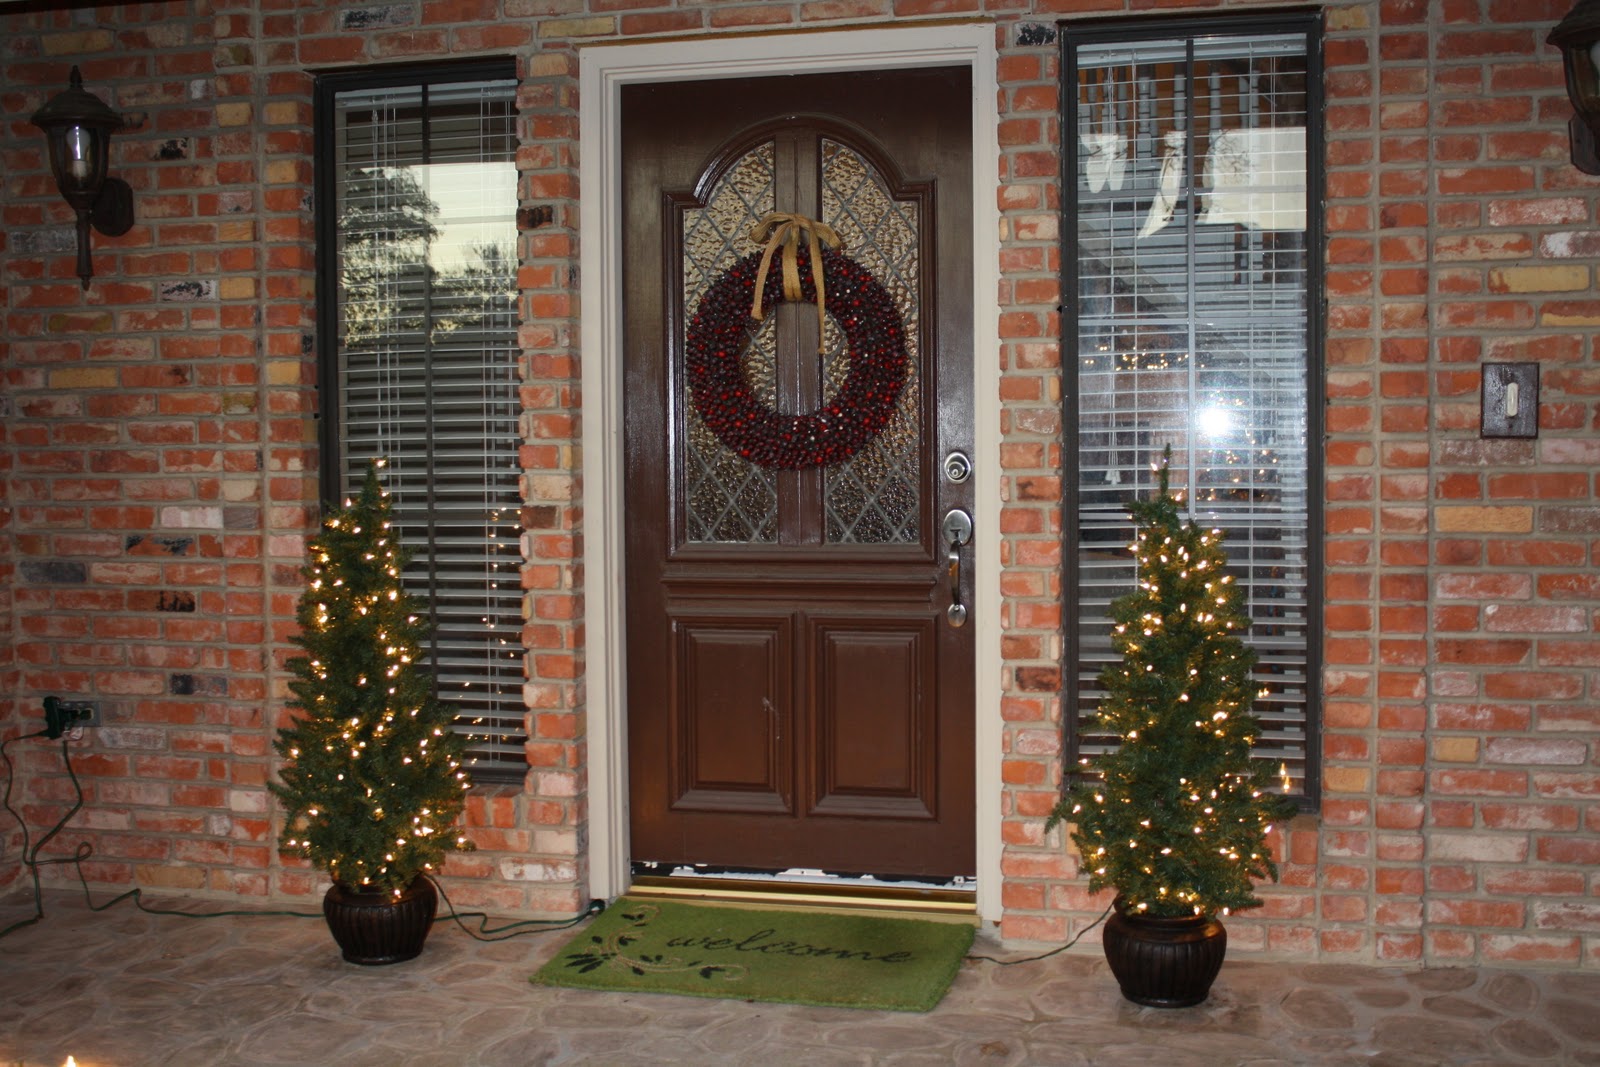 Entrance With And Appealing Entrance With Green Doormat And Dark Brown Front Door Ideas With Silver Door Lever Furnished With Christmas Decor And Completed With Wall Sconces Exterior Front Door Ideas: The “Face” Of The House